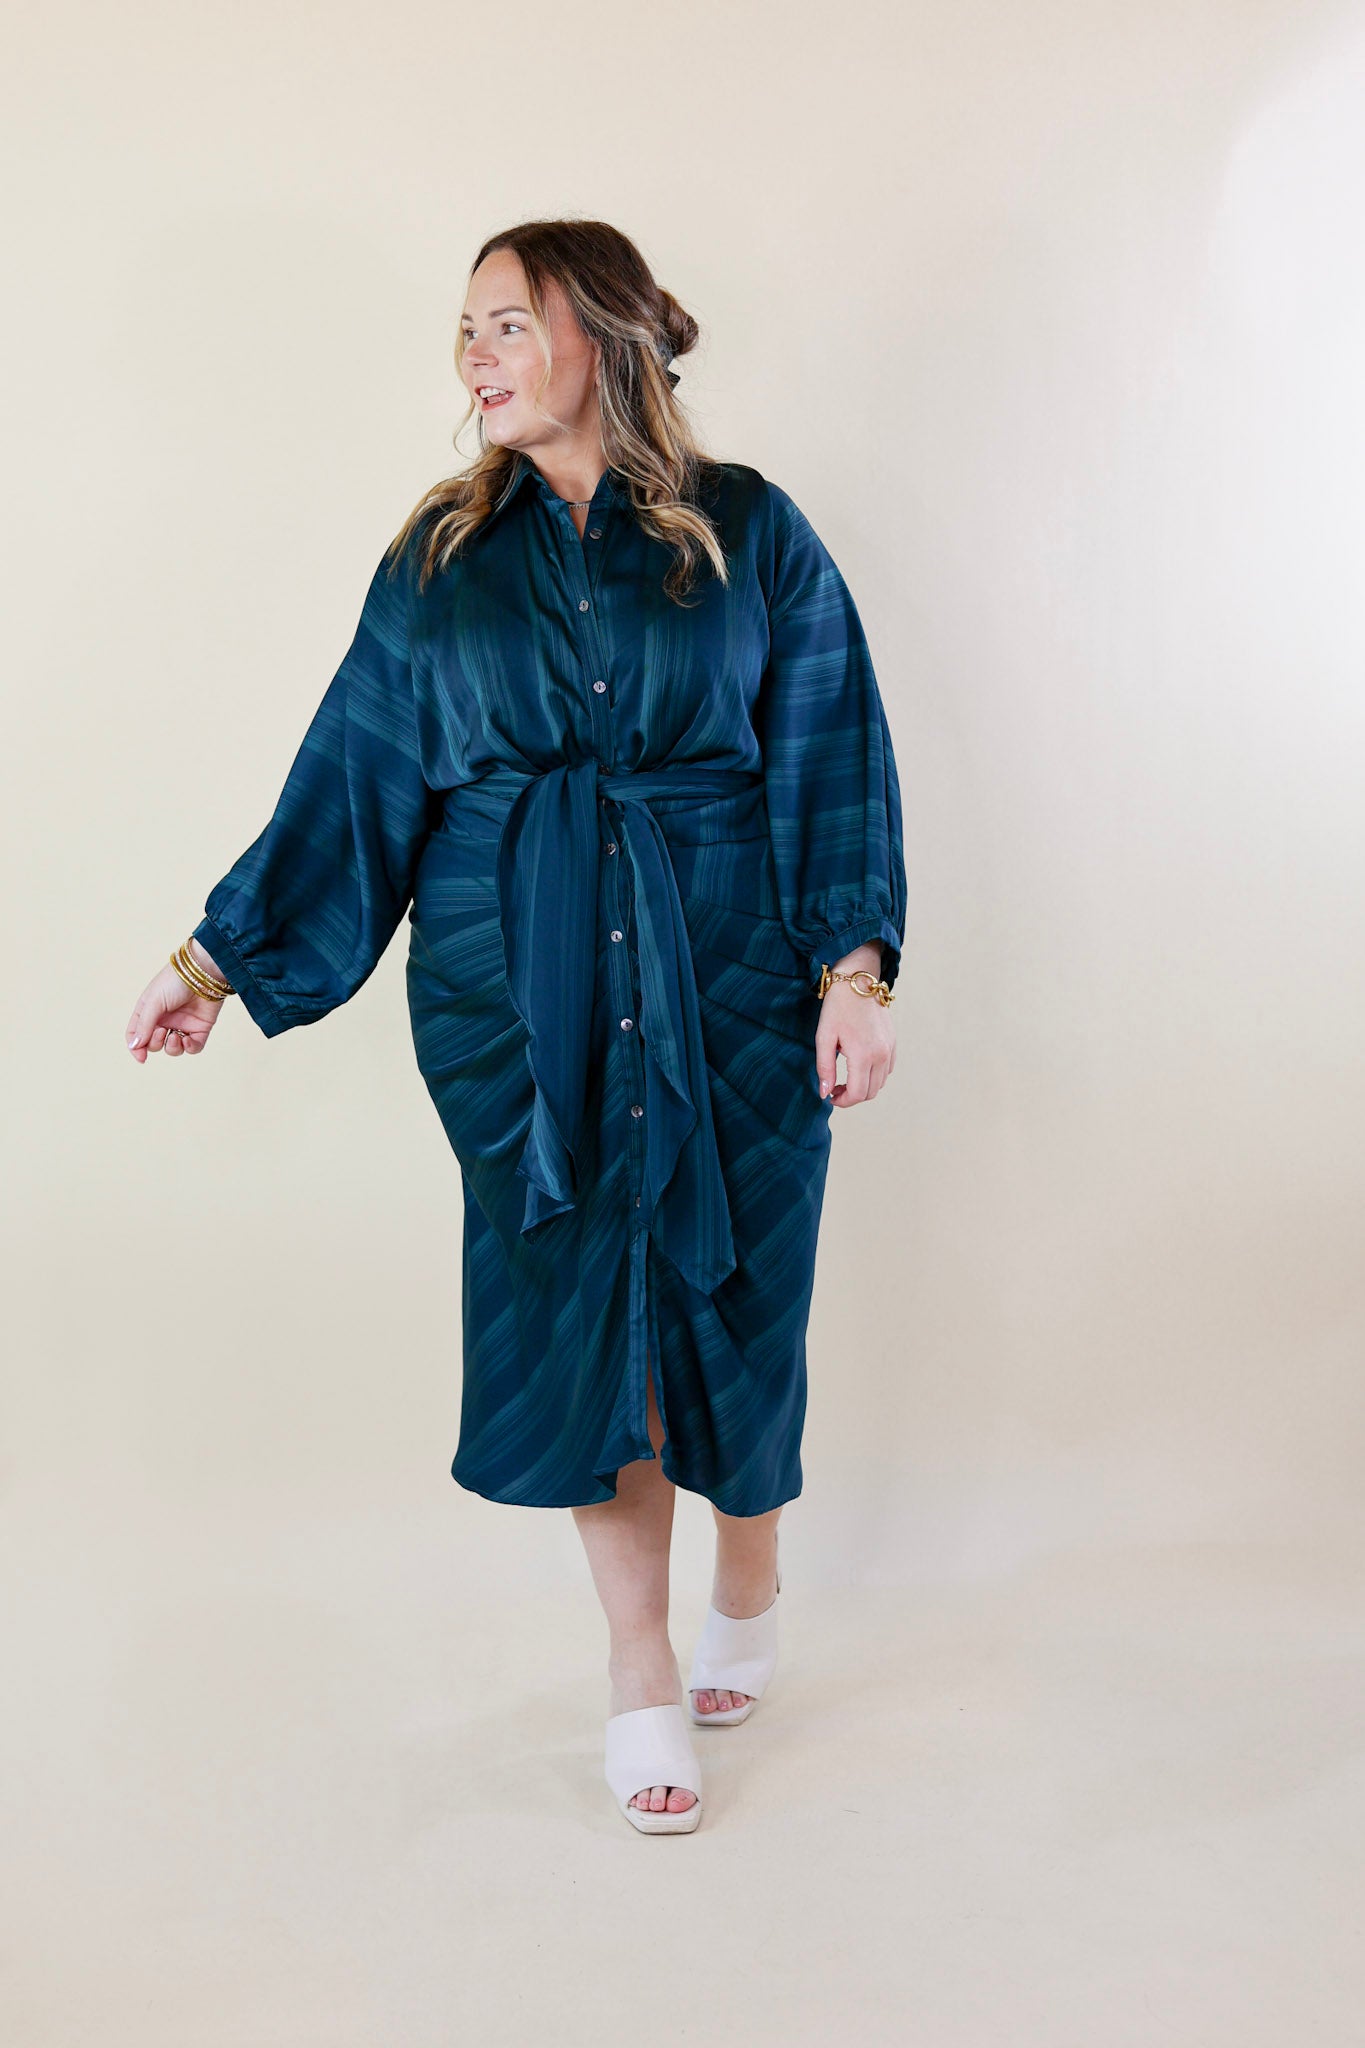 Decisions To Make Button Up Midi Dress in Dark Teal Blue - Giddy Up Glamour Boutique